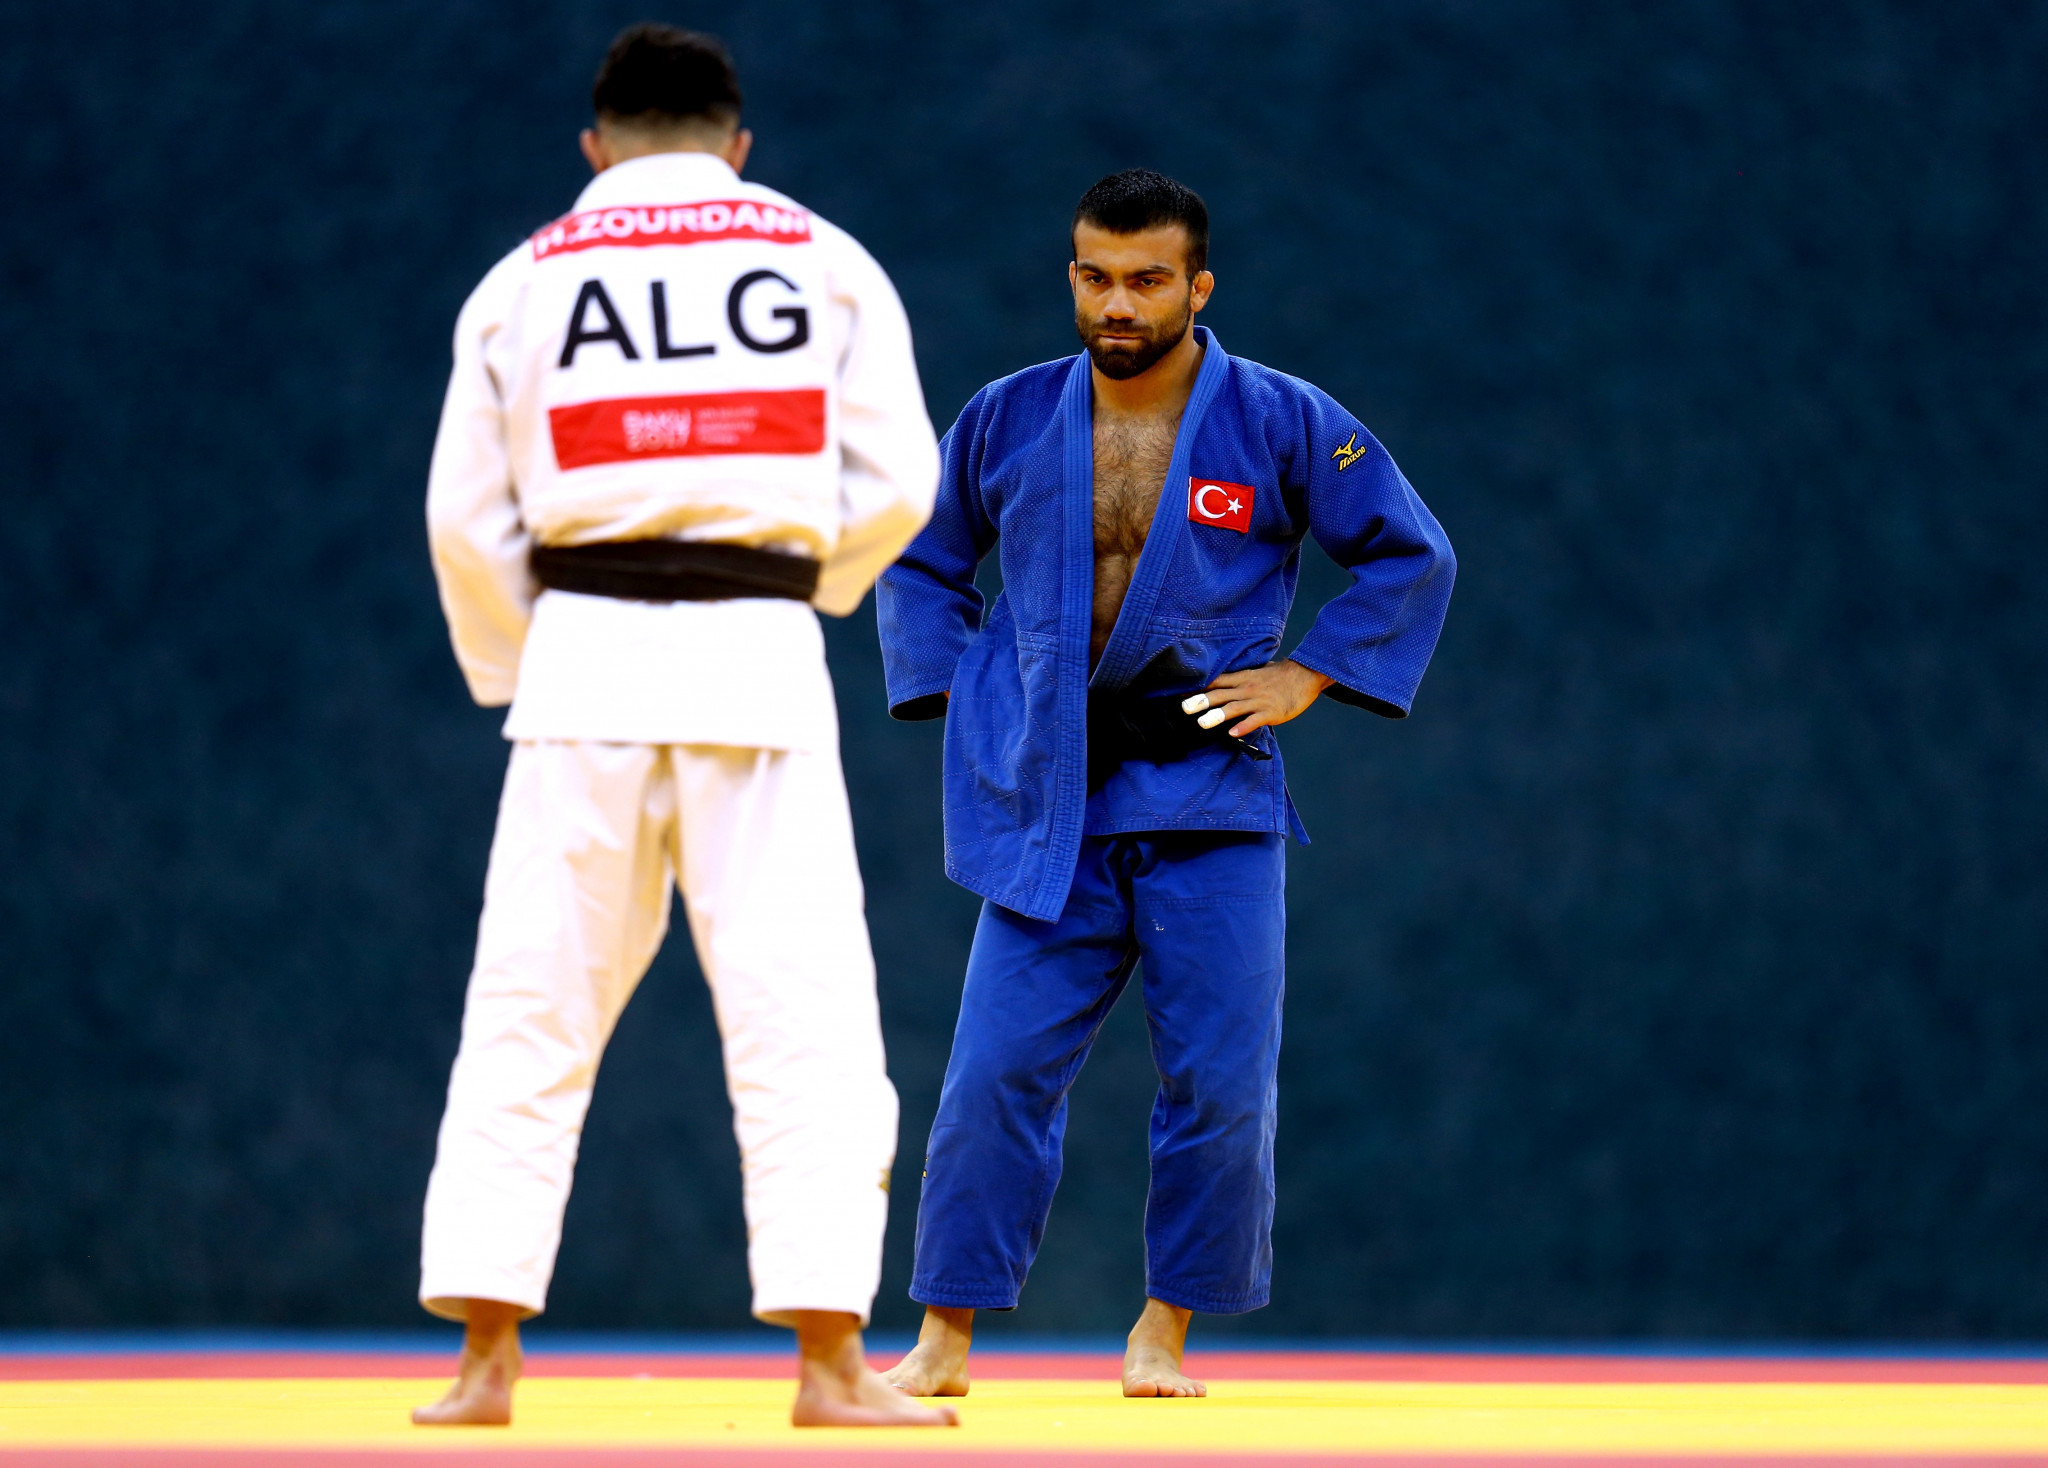 Algeria's Houd Zourdani withdrew from the under 66 kilograms competition at the International Judo Federation (IJF) World Championships for failing to make the weight and not because he was drawn to face an Israeli athlete ©Getty Images